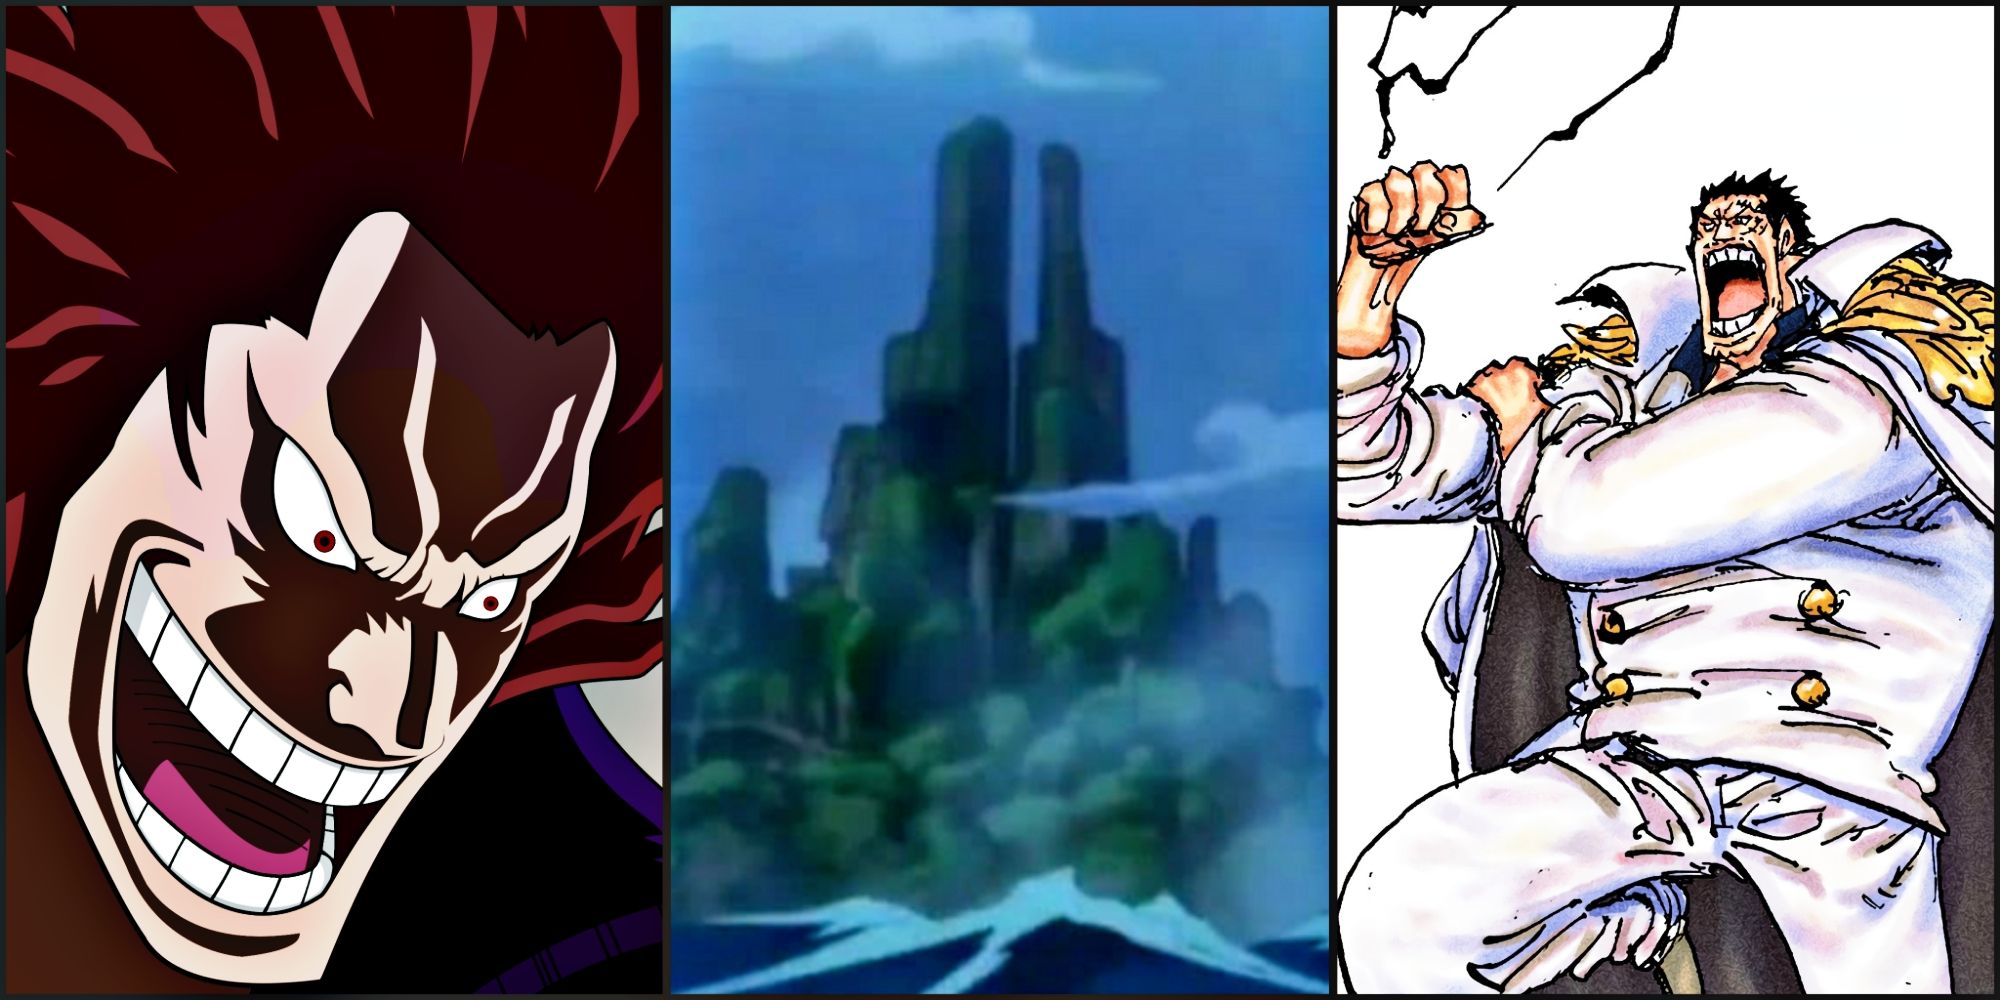 Did Rocks D. Xebec rely on Devil Fruit Powers or just Haki?